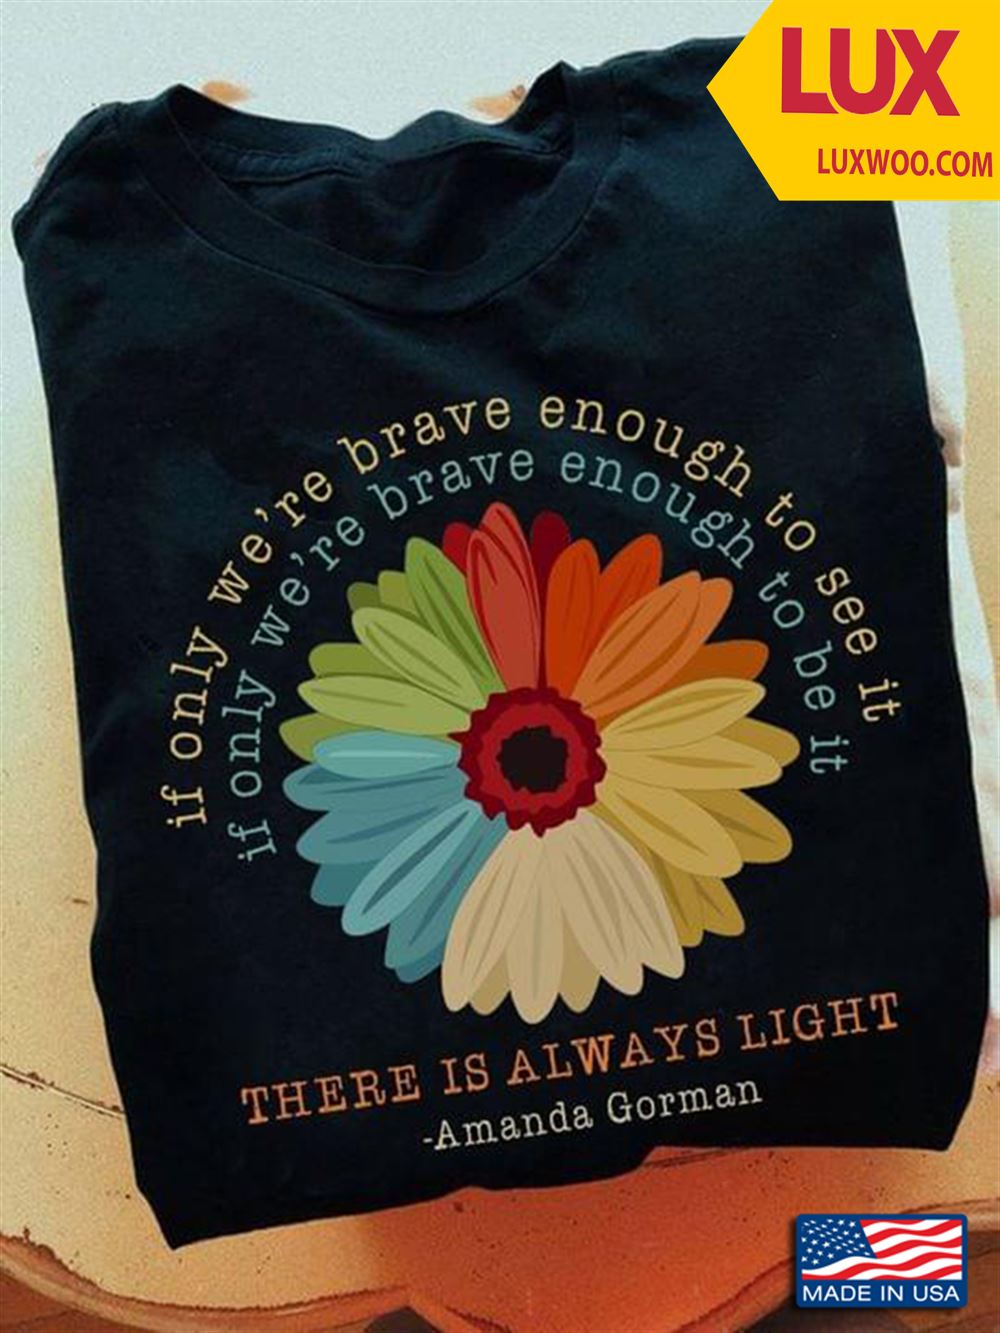 If Only Were Brave Enough To See It If Only Were Brave Enough To Be It There Is Always Light Tshirt Size Up To 5xl